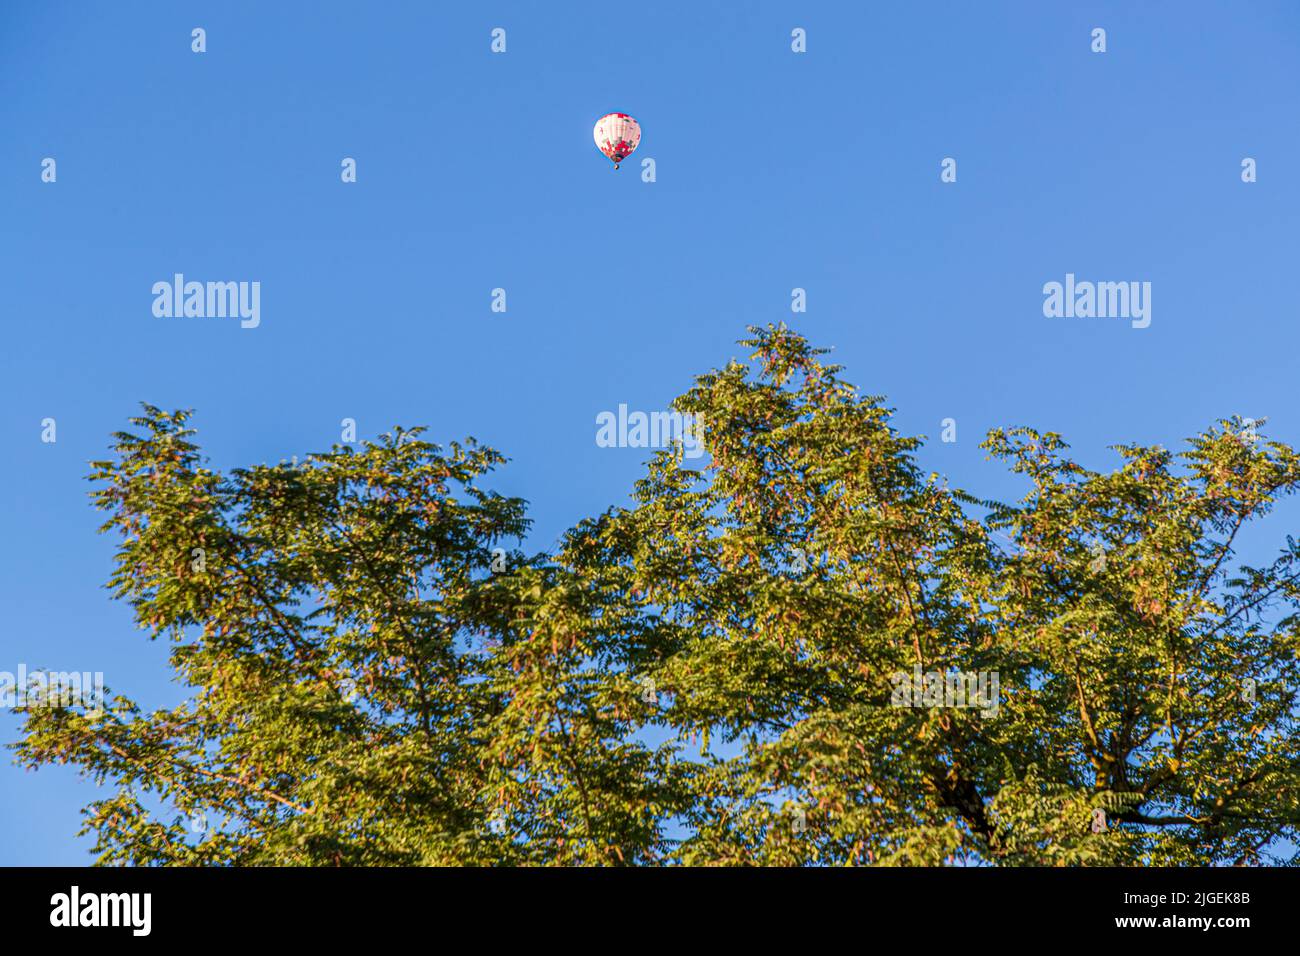 Hot air balloon behind tree in blue sky Stock Photo